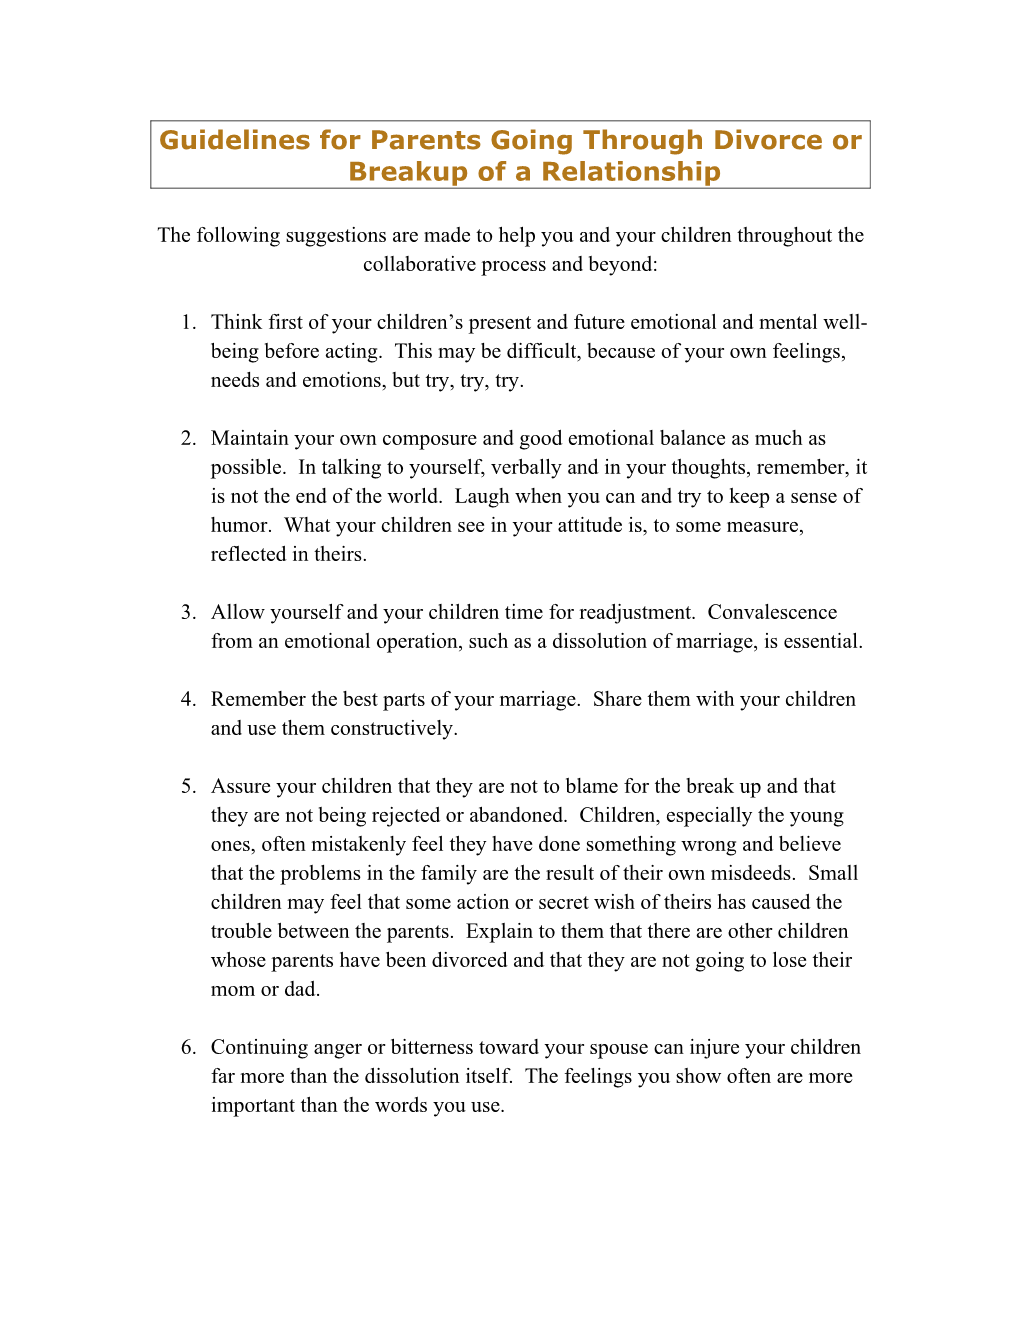 Guidelines for Parents Going Through Divorce Or Breakup of a Relationship